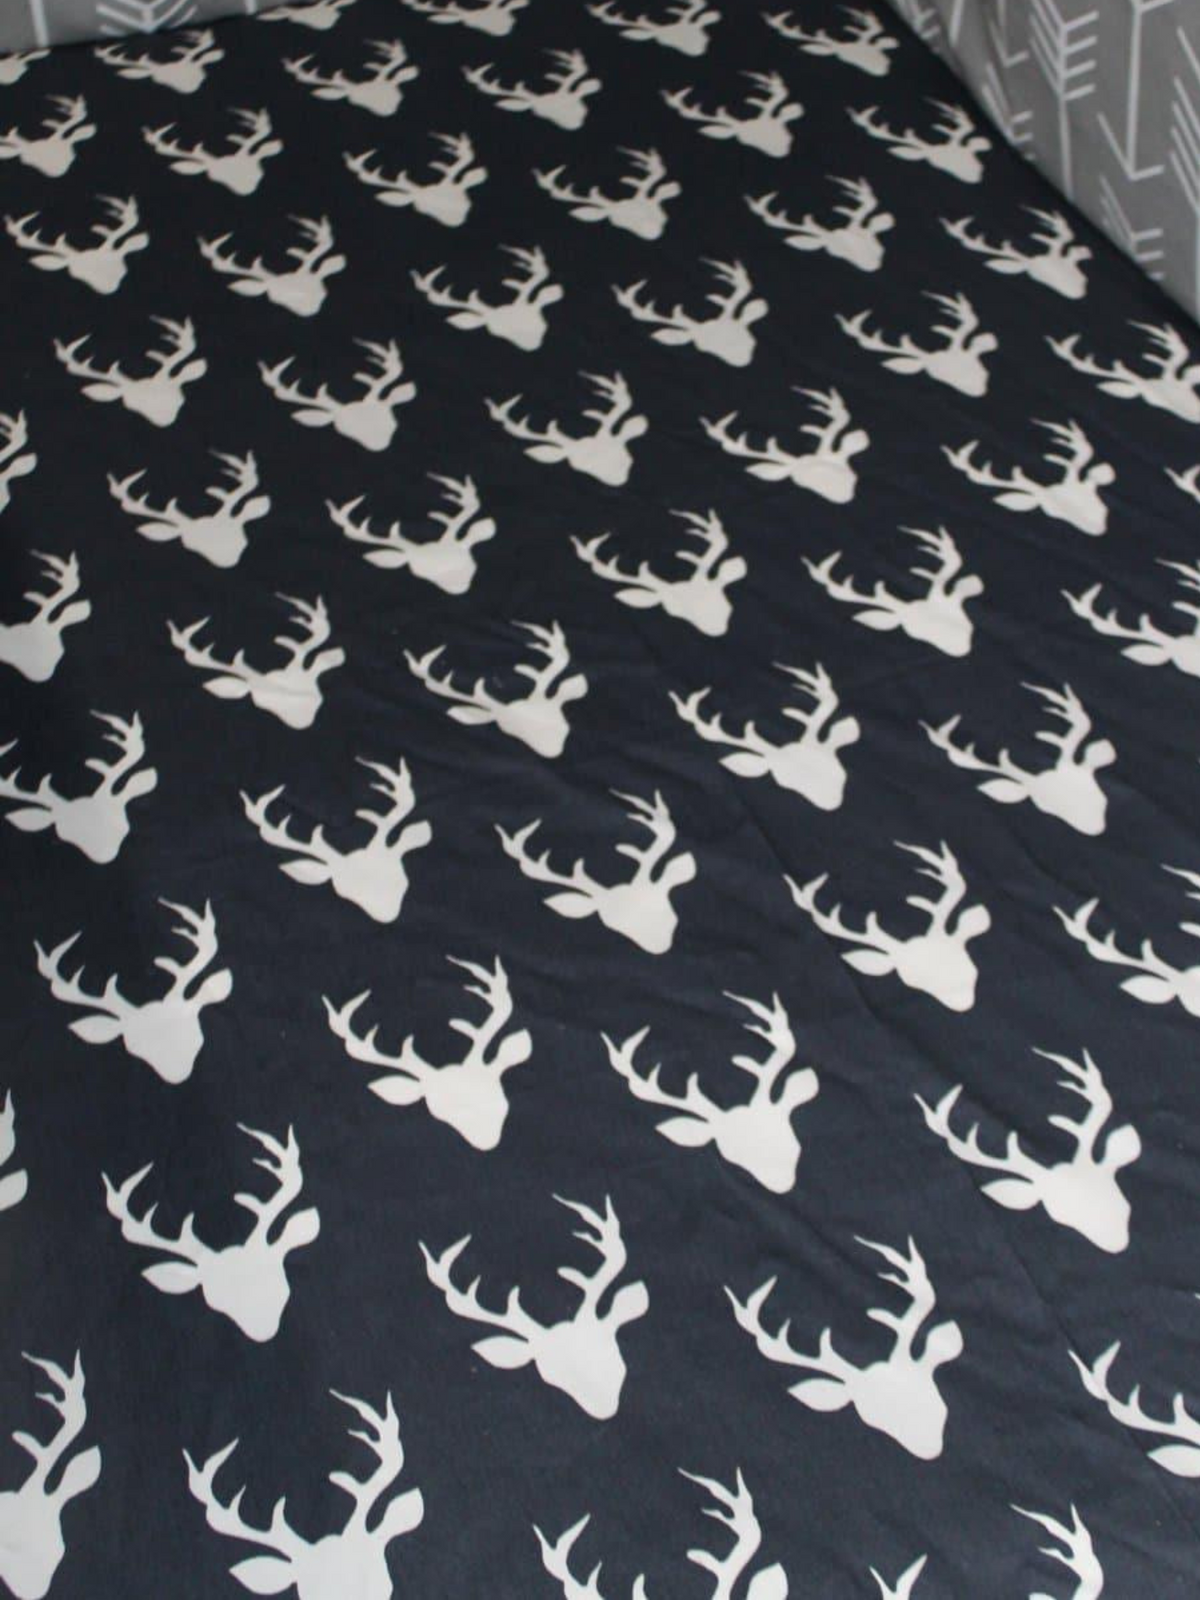 Fitted Sheet - Navy Buck Woodland Sheet : All Bed Sizes - DBC Baby Bedding Co 